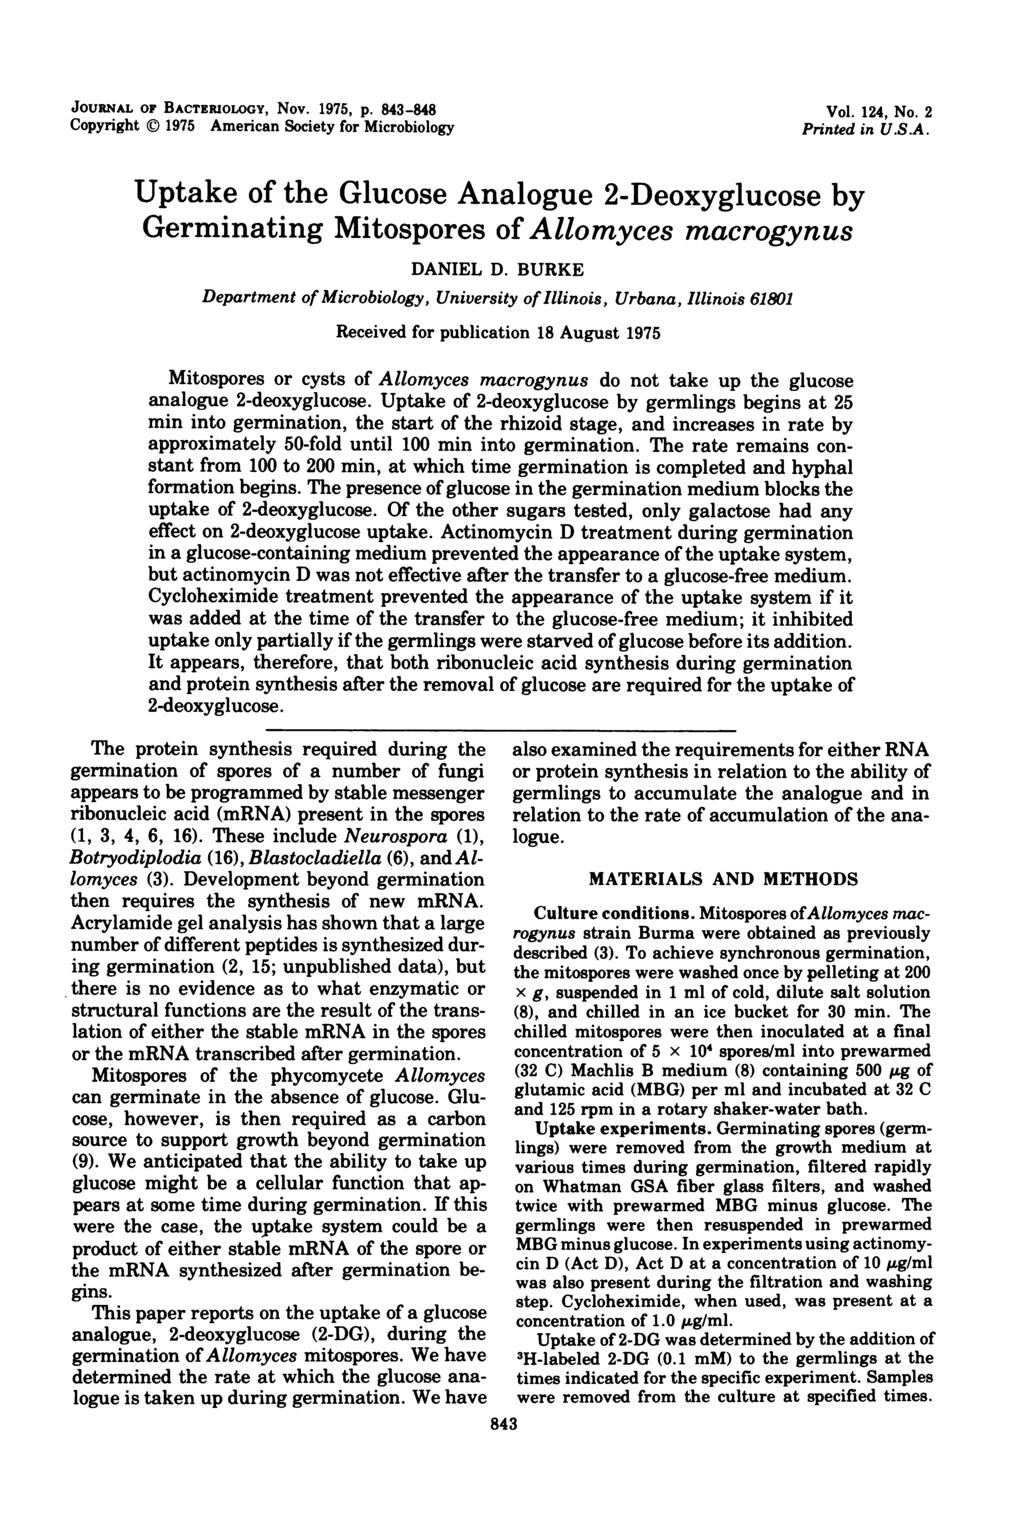 JOURNAL OF BACTERIOLOGY, Nov. 1975, p. 843-848 Copyright C) 1975 American Society for Microbiology Vol. 124, No. 2 Printed in U.S.A. Uptake of the Glucose Analogue 2-Deoxyglucose by Germinating Mitospores of Allomyces macrogynus DANIEL D.